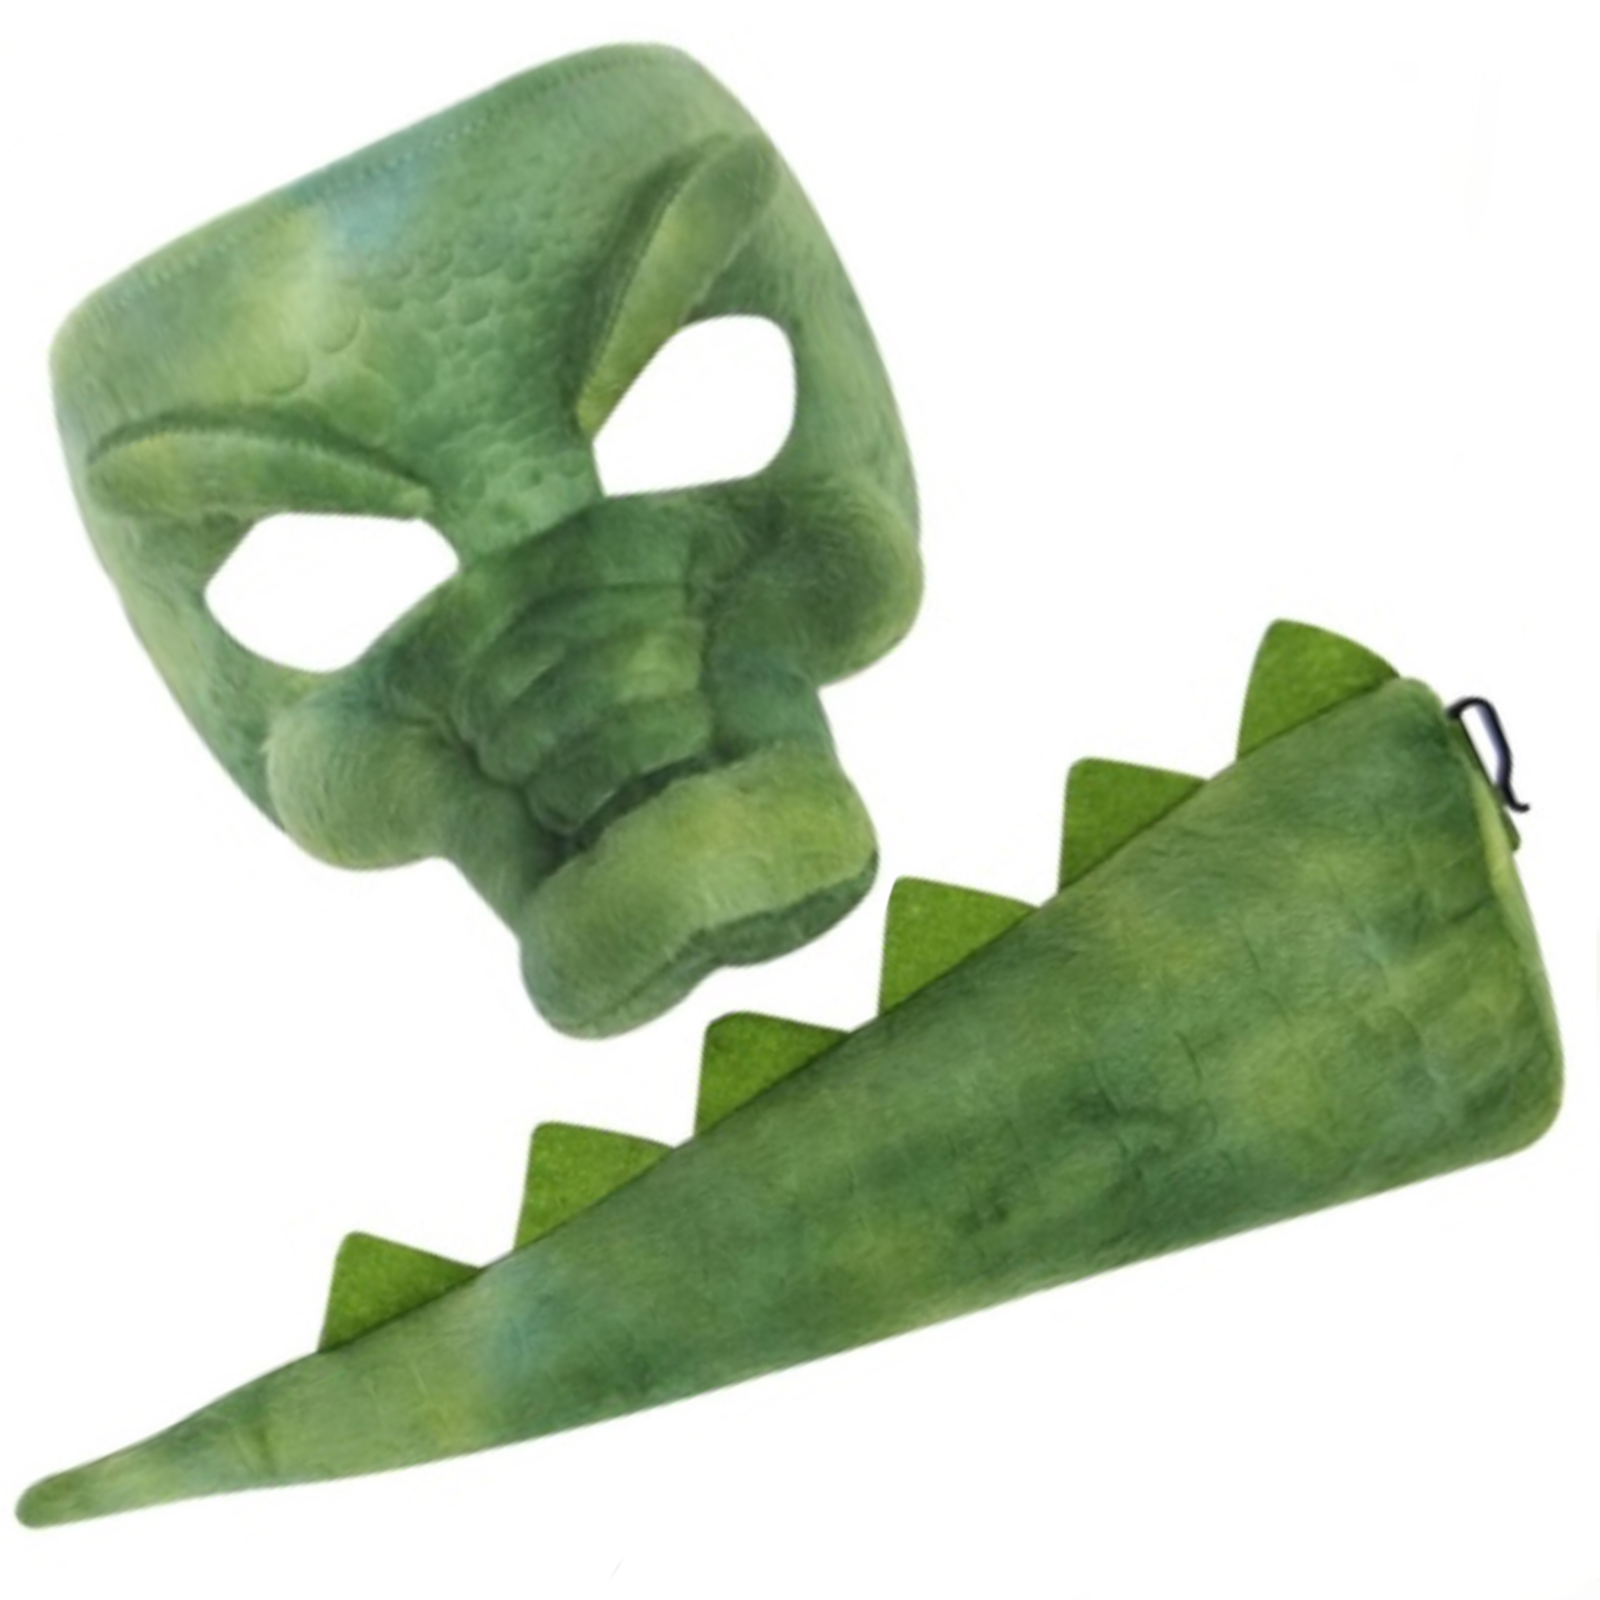 Crocodile Deluxe Mask and Tail Set